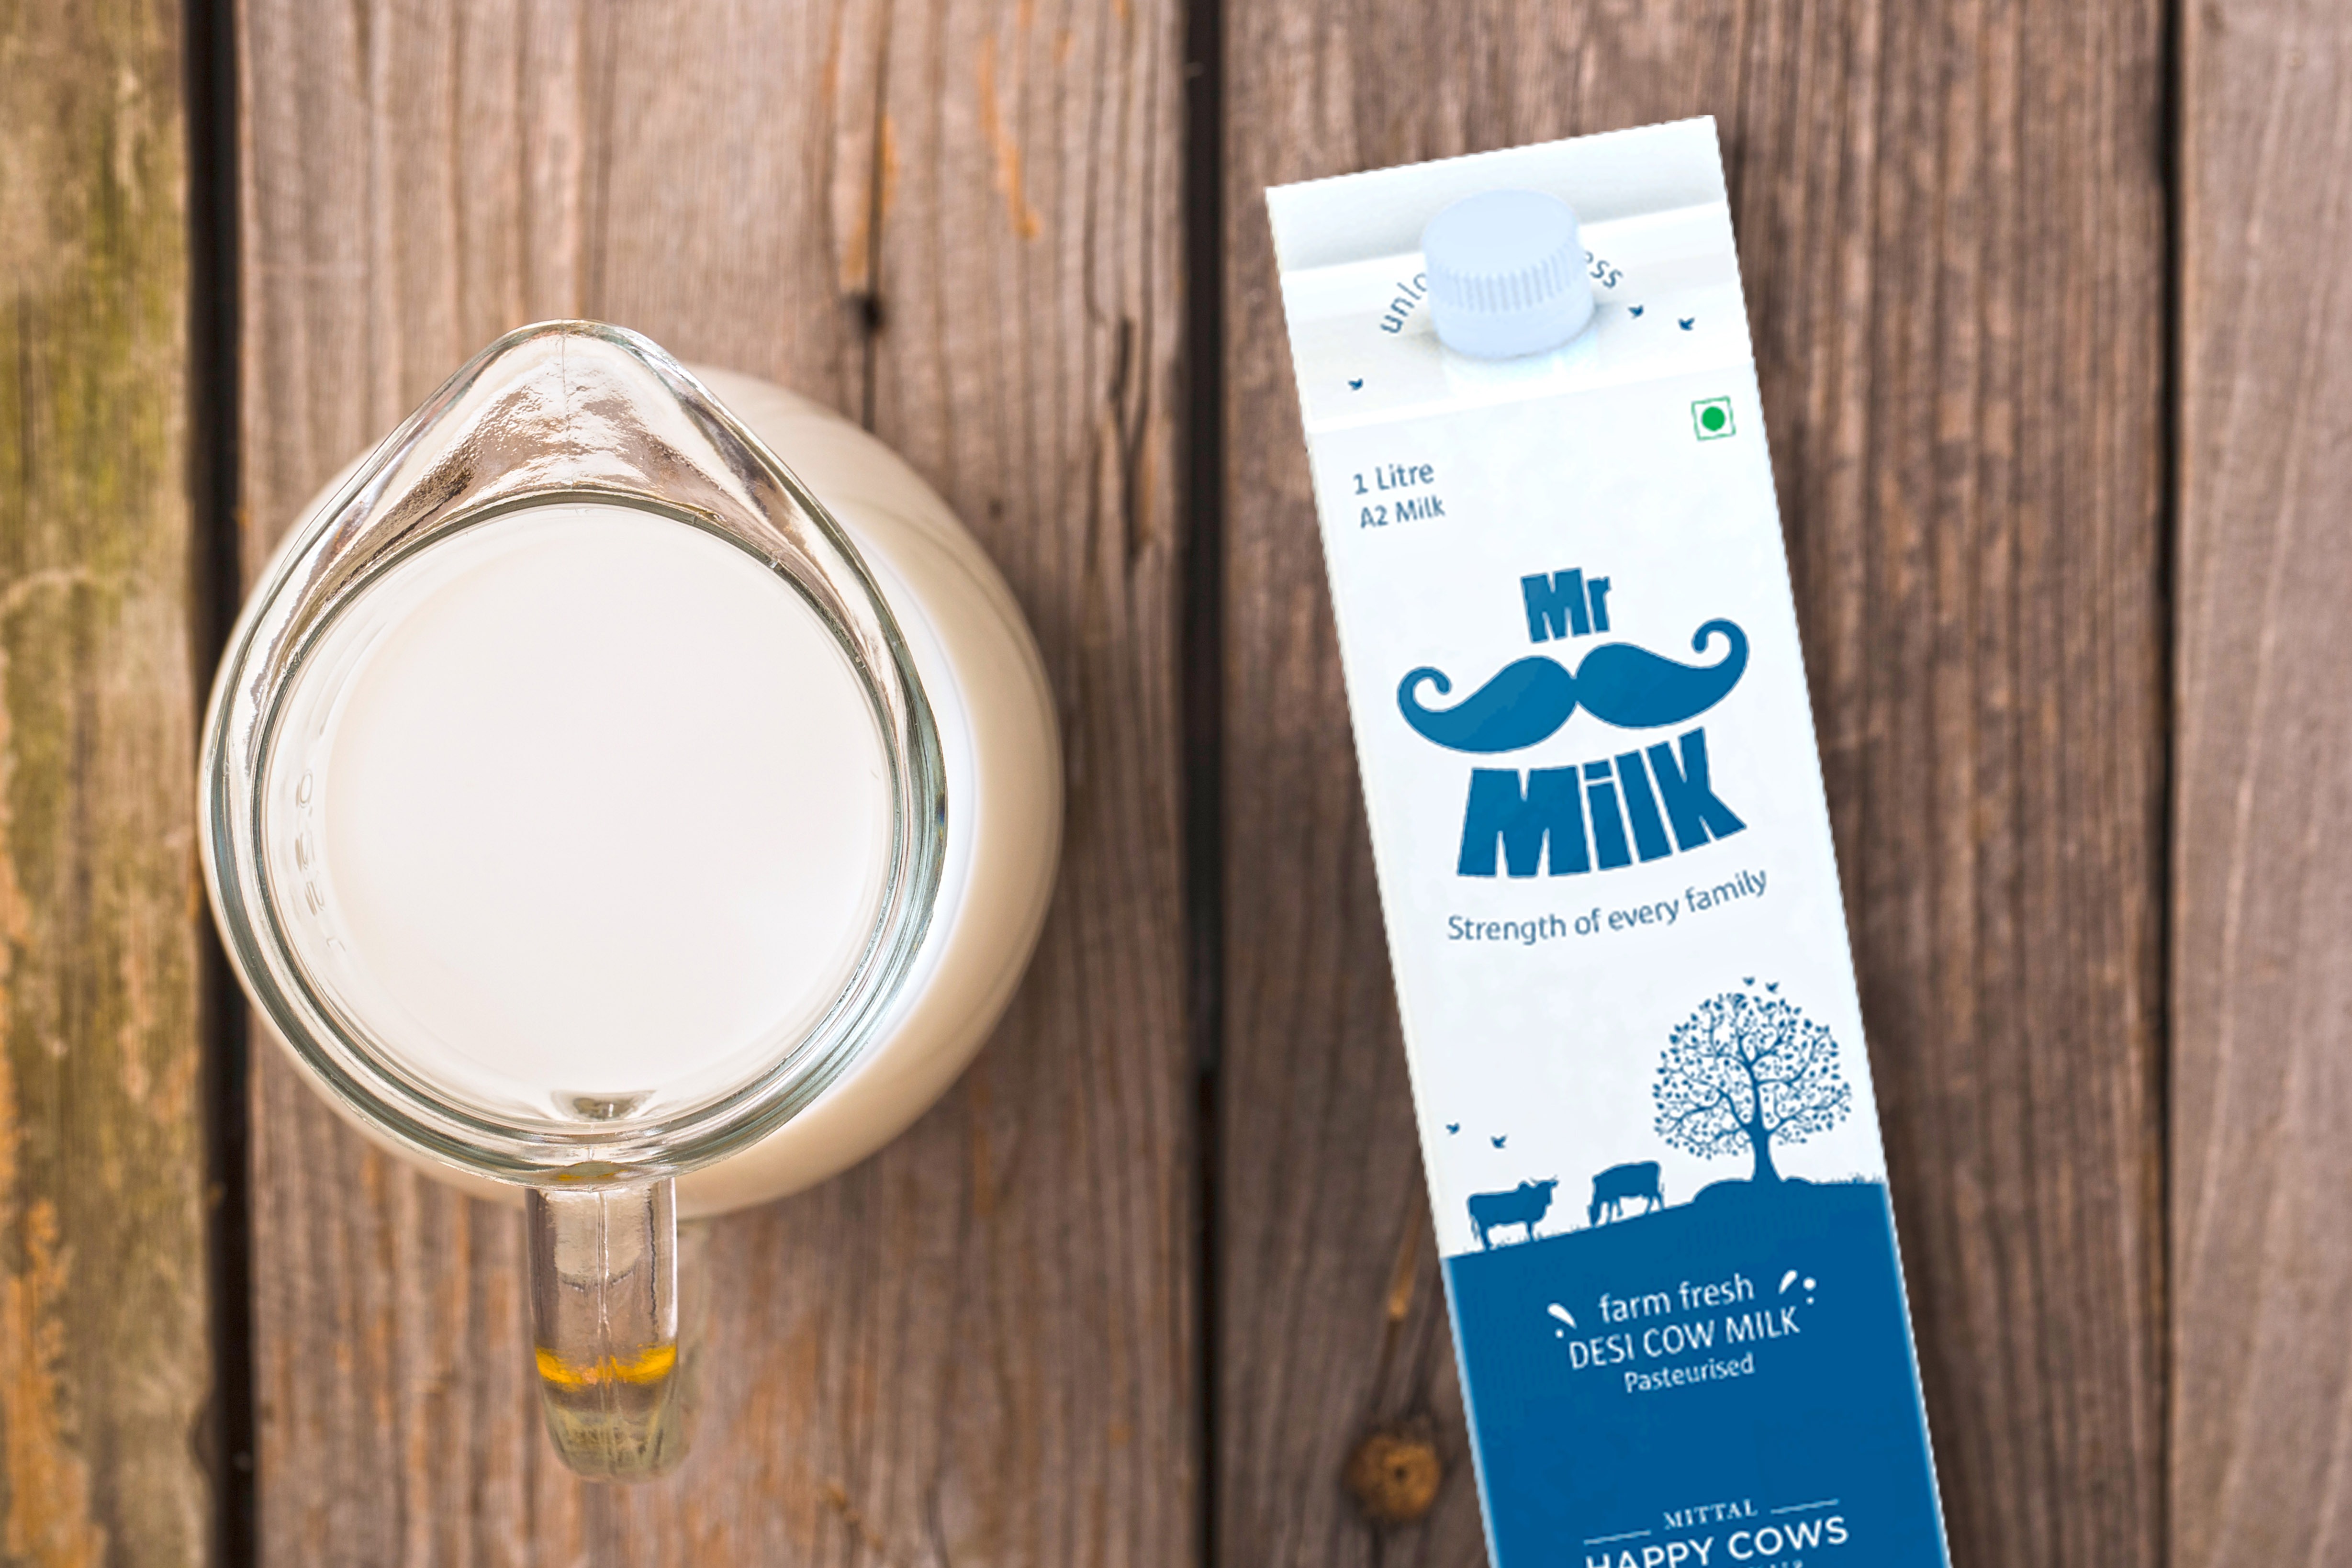 The Top 5 Reasons to Consume A2 Milk